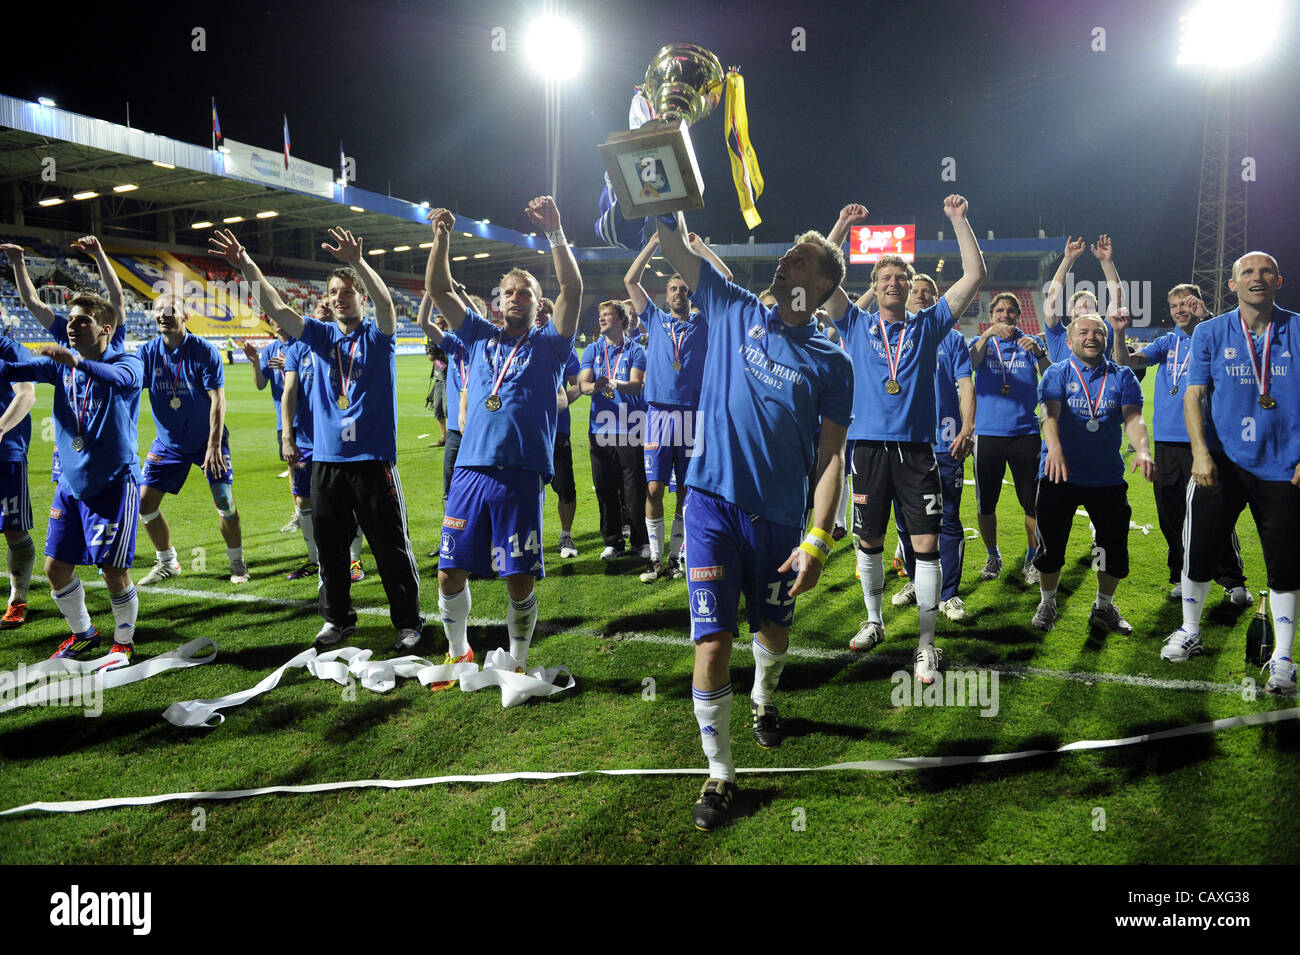 Players of Sigma Olomouc celebrate victory in the Cup of the Czech Post (czech soccer cup) after winning the final match against Sparta Prague in Pilsen, Czech Republic on May 2, 2012. (CTK Photo/Petr Eret) Stock Photo